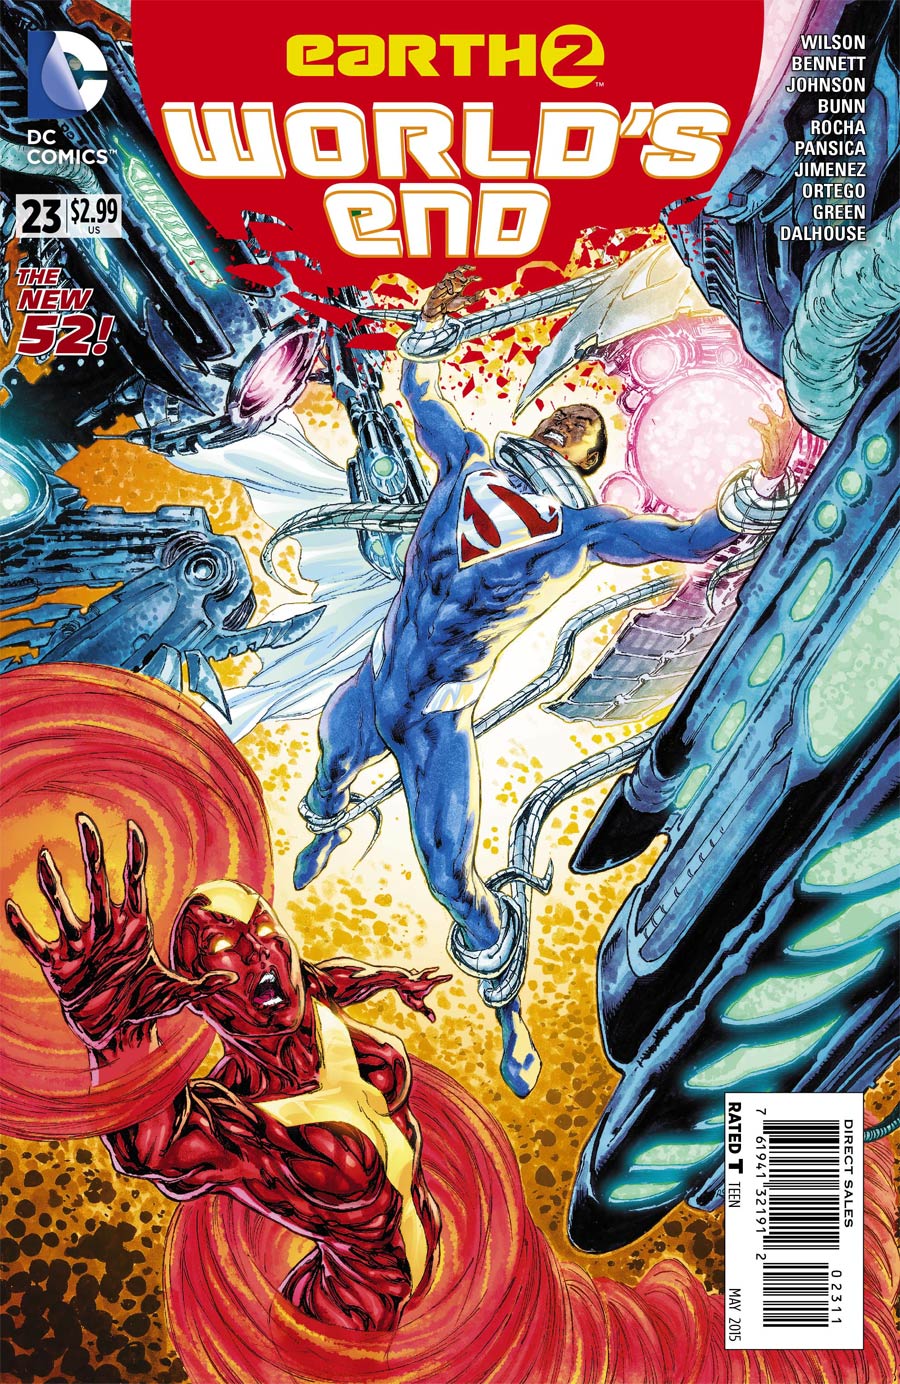 Earth 2 Worlds End #23